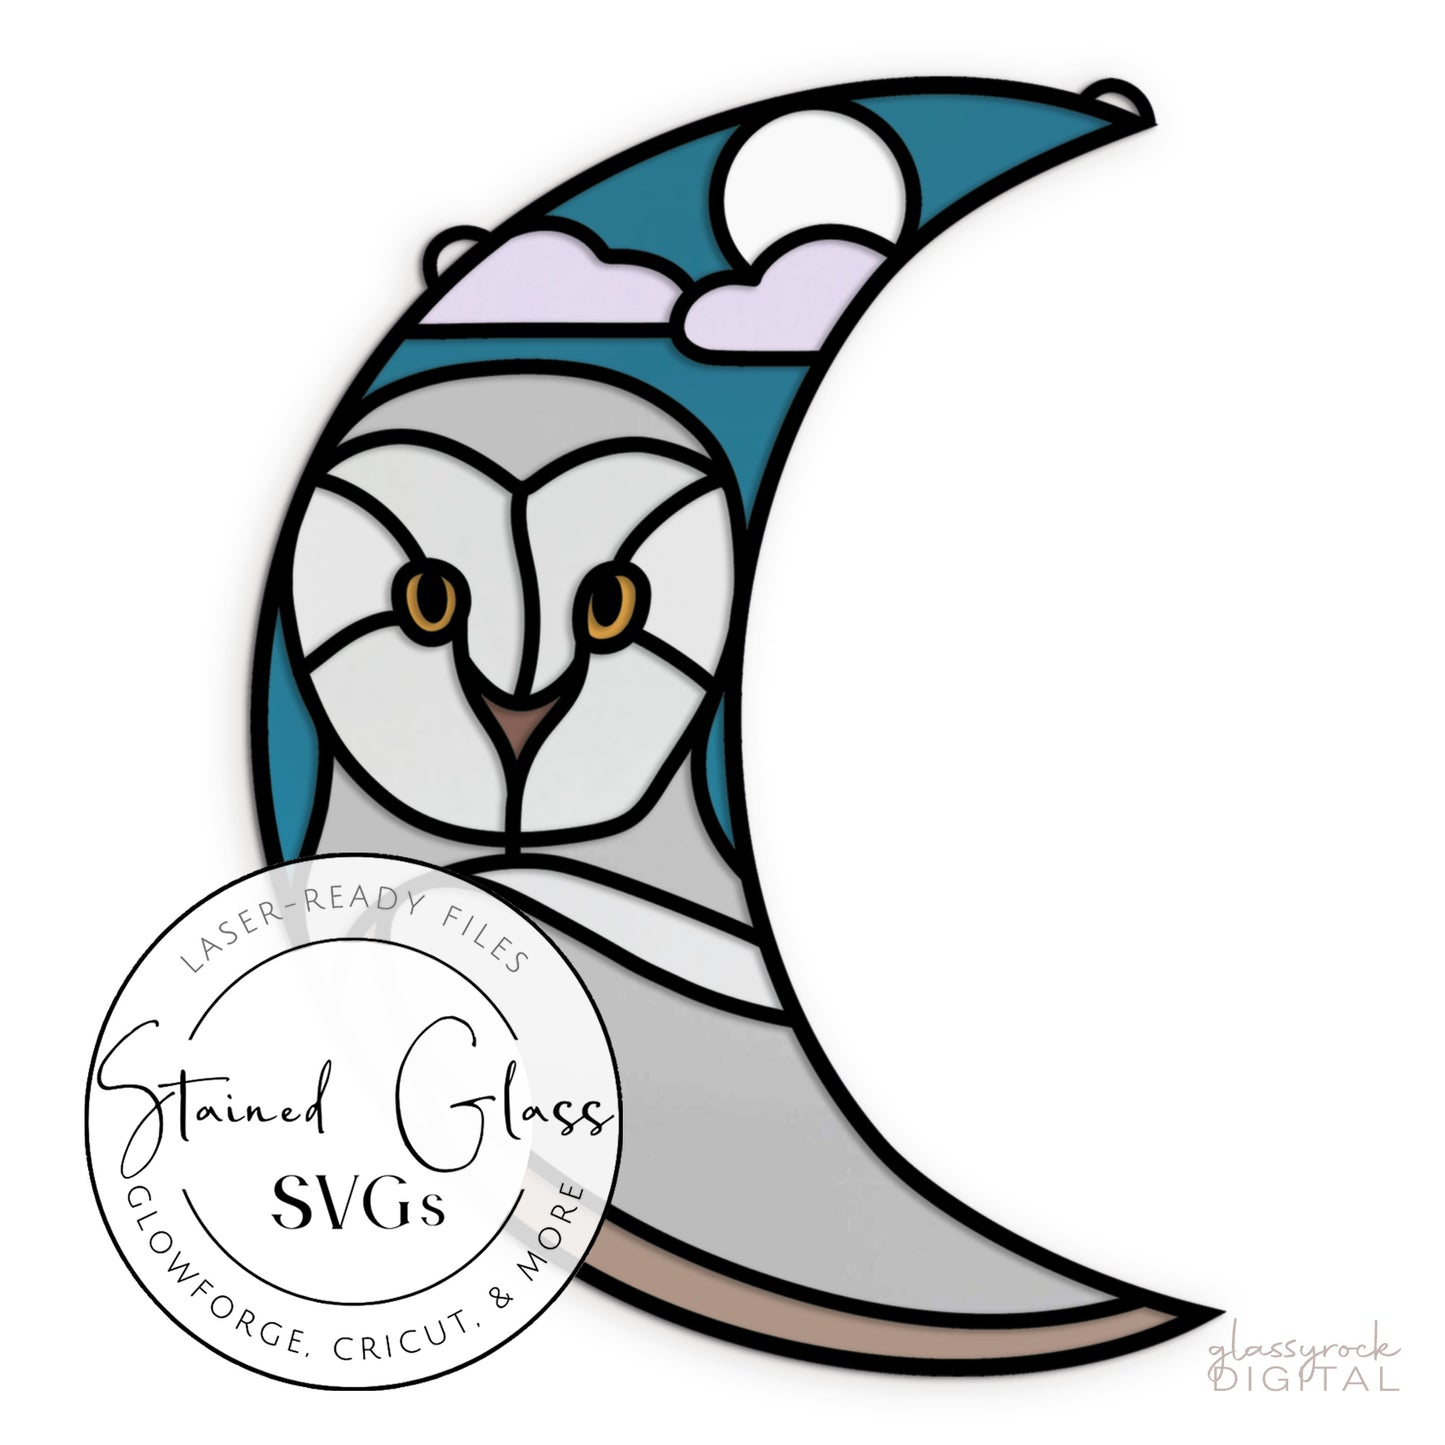 Stained Glass Snowy Owl Crescent Moon, Files for Laser Cutting - SVG, PNG, DXF